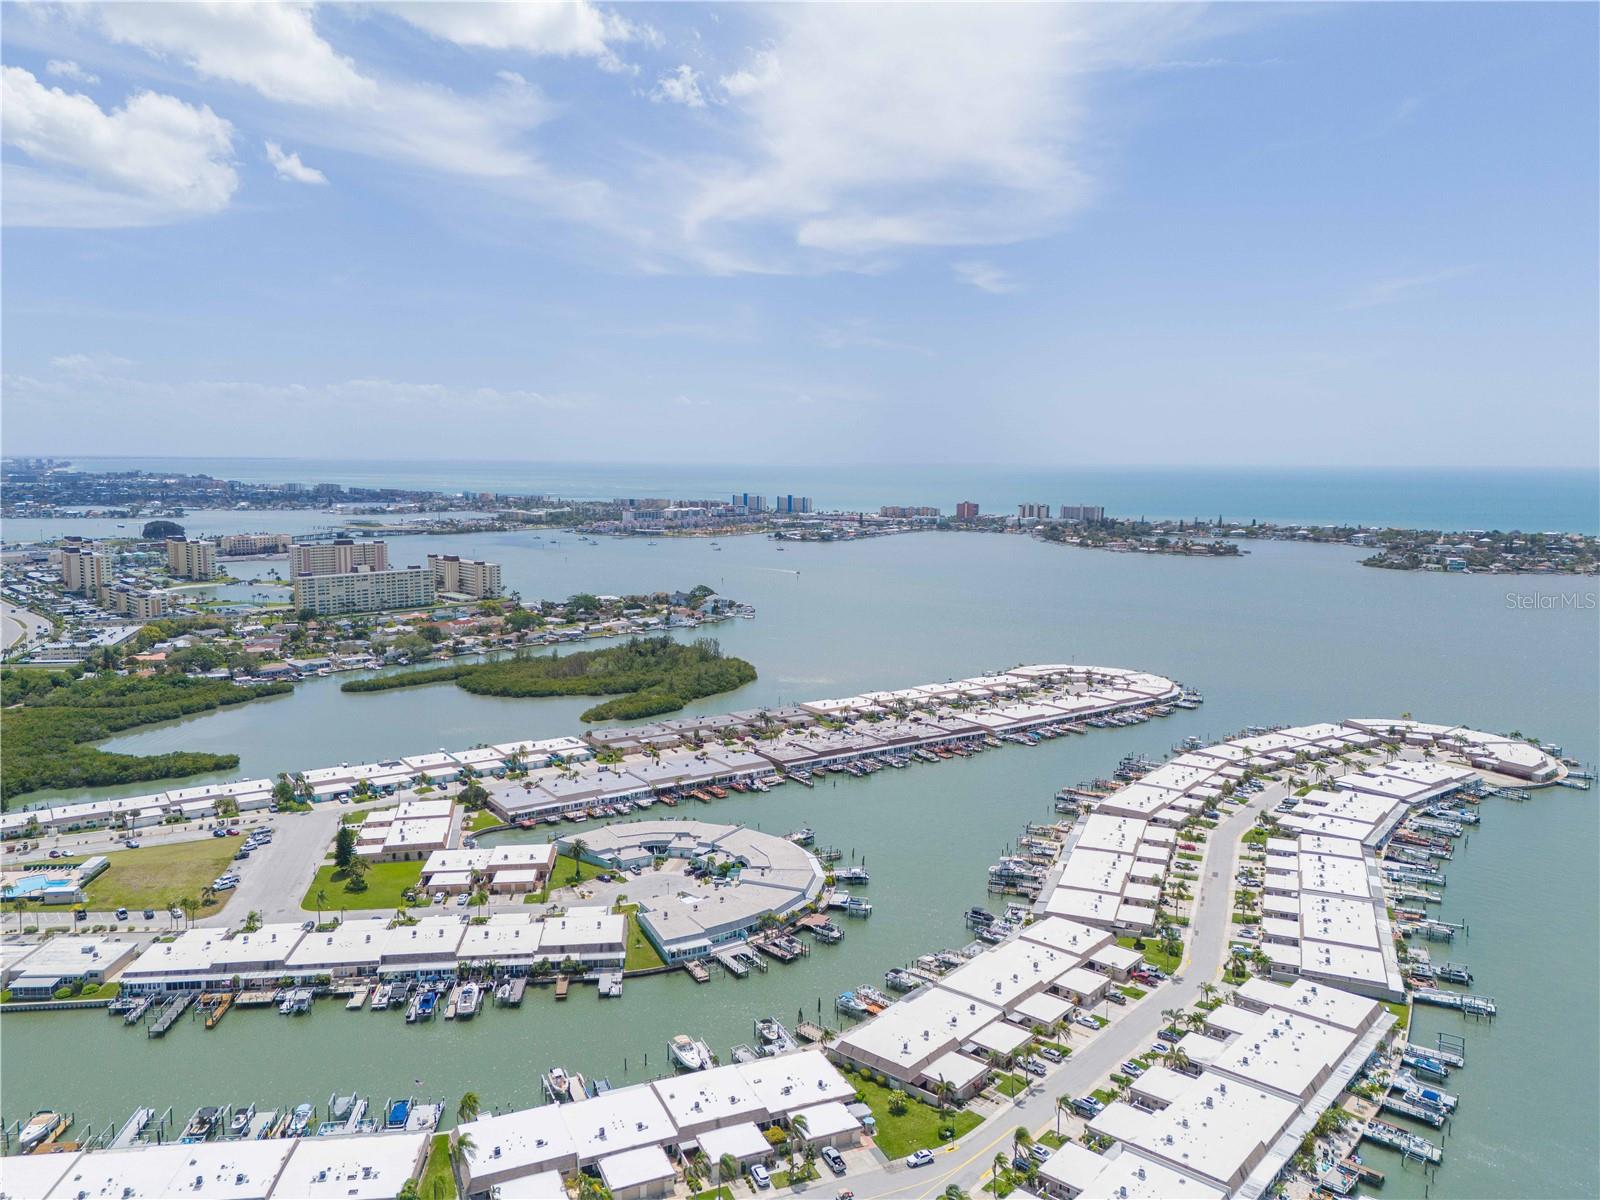 Aerial view of the community and the Intracoastal Waterway